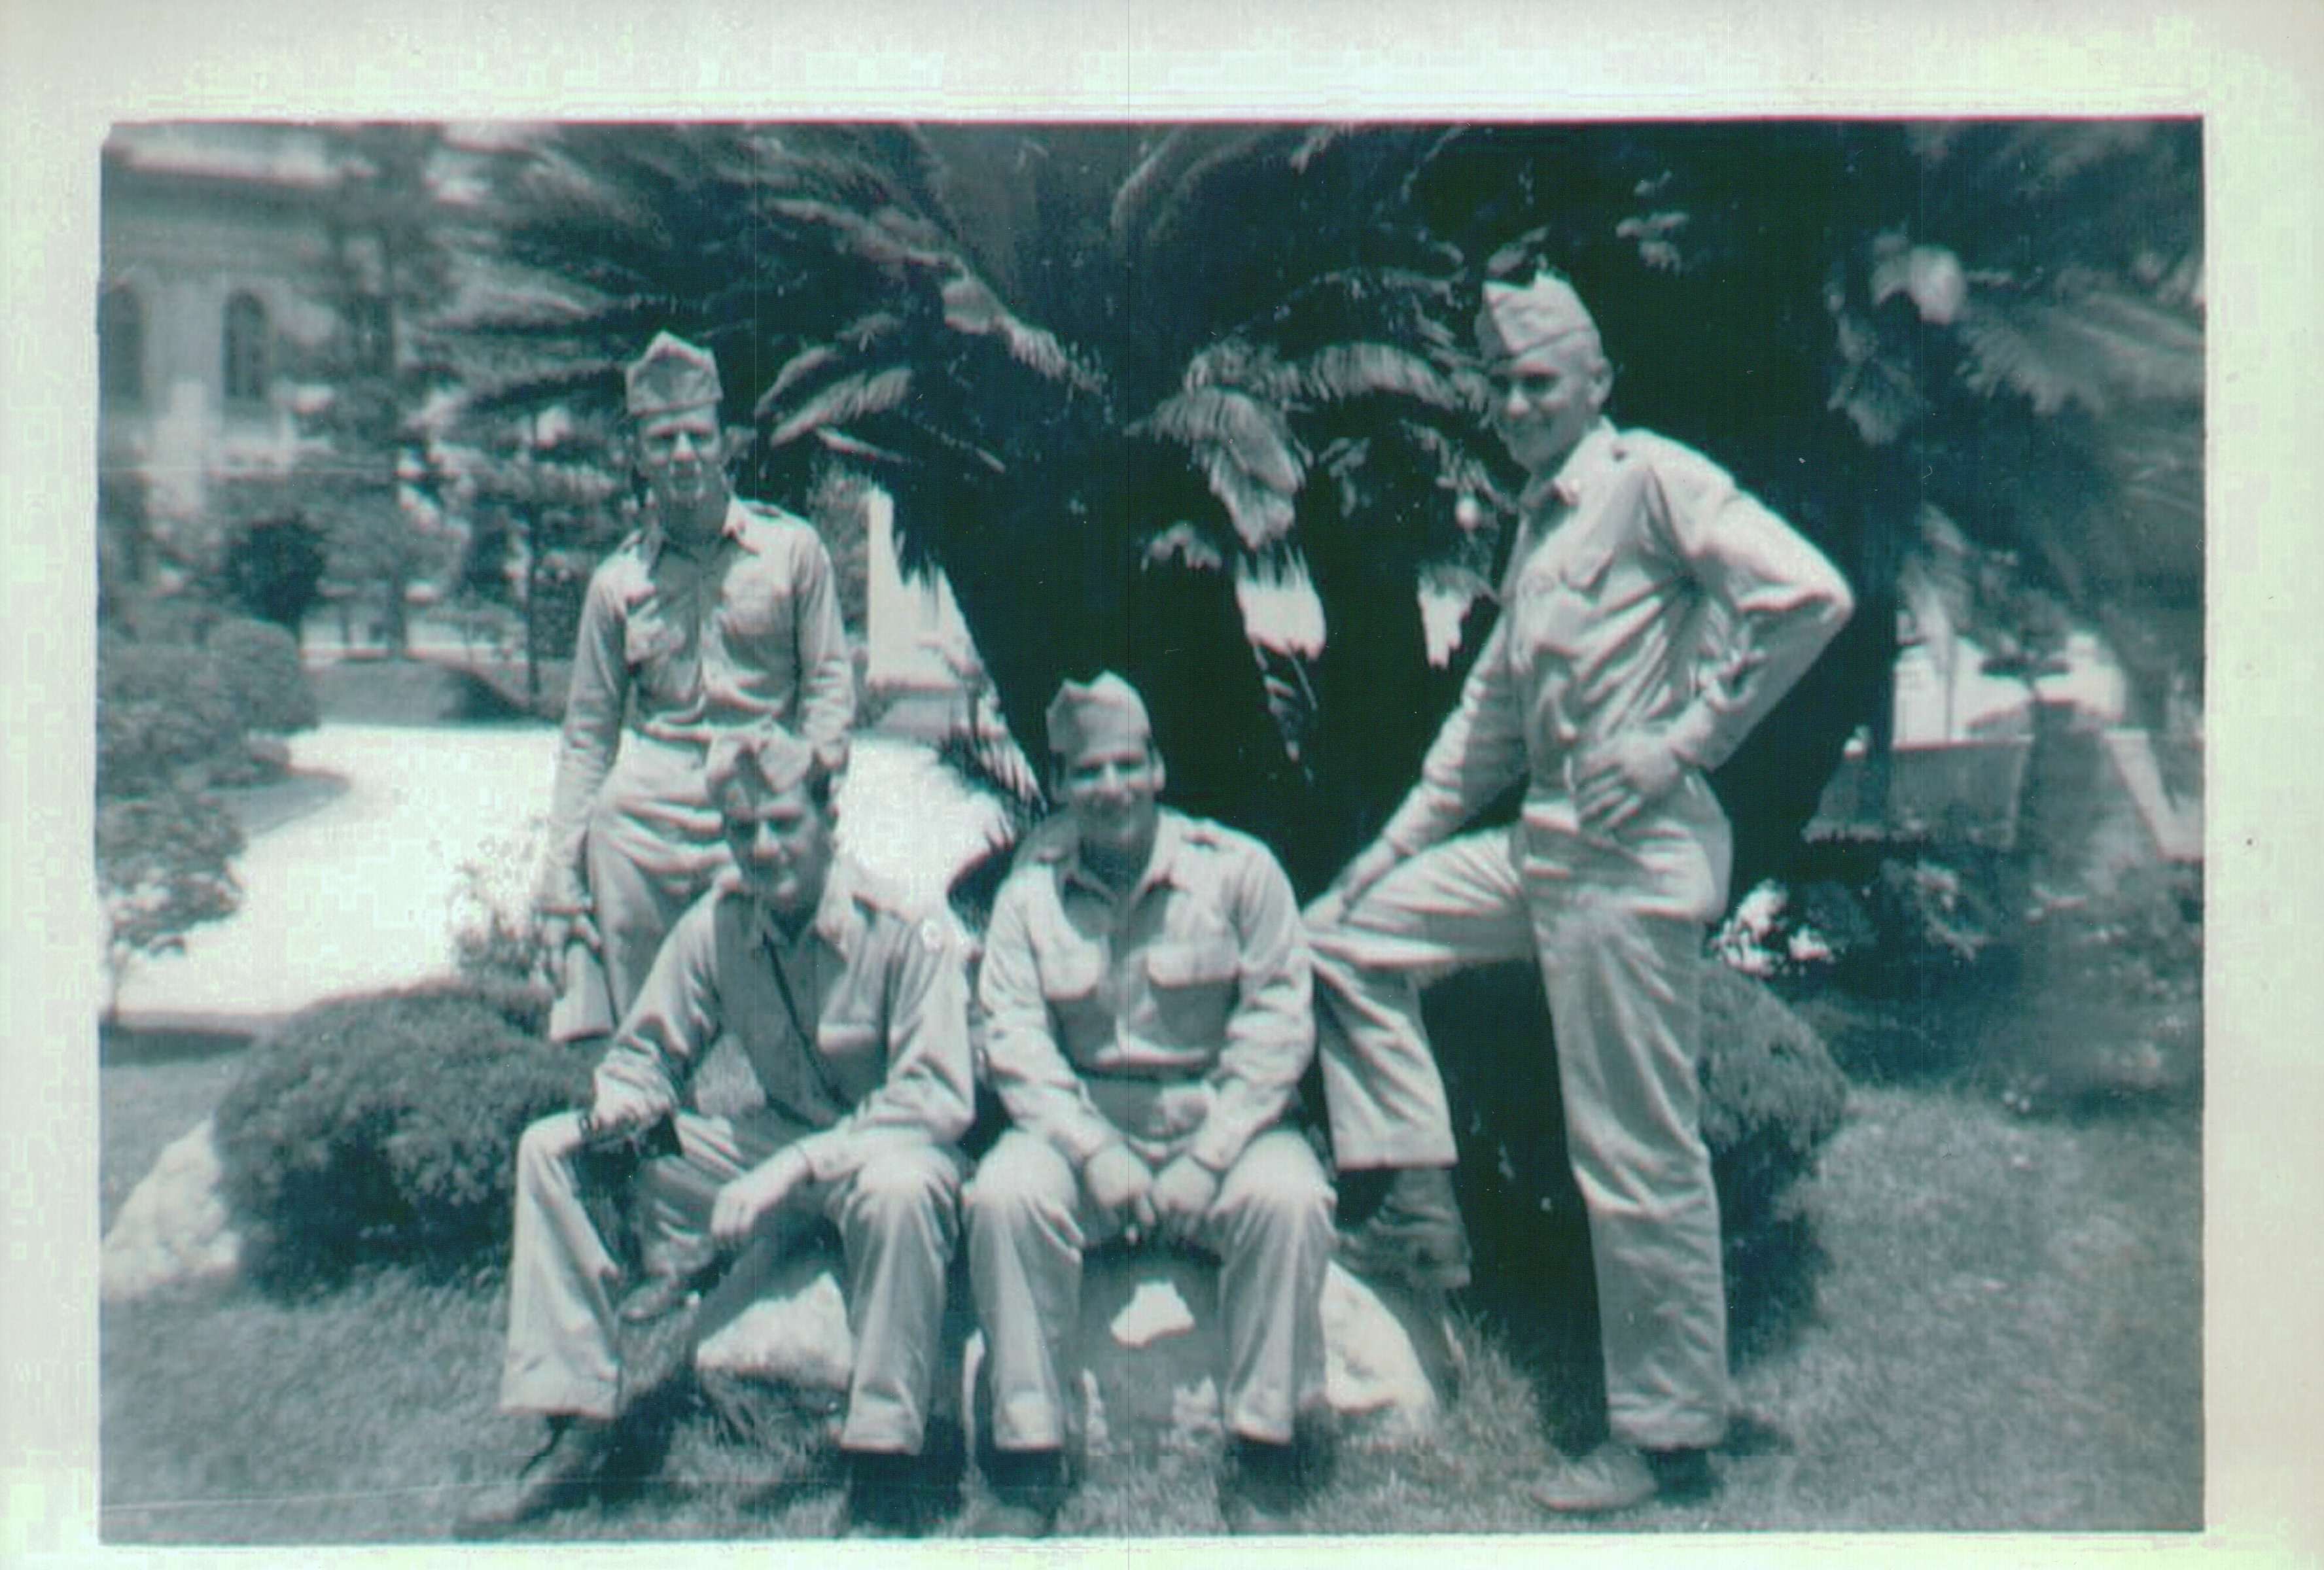 Frank Seaman with Fellow Soldiers